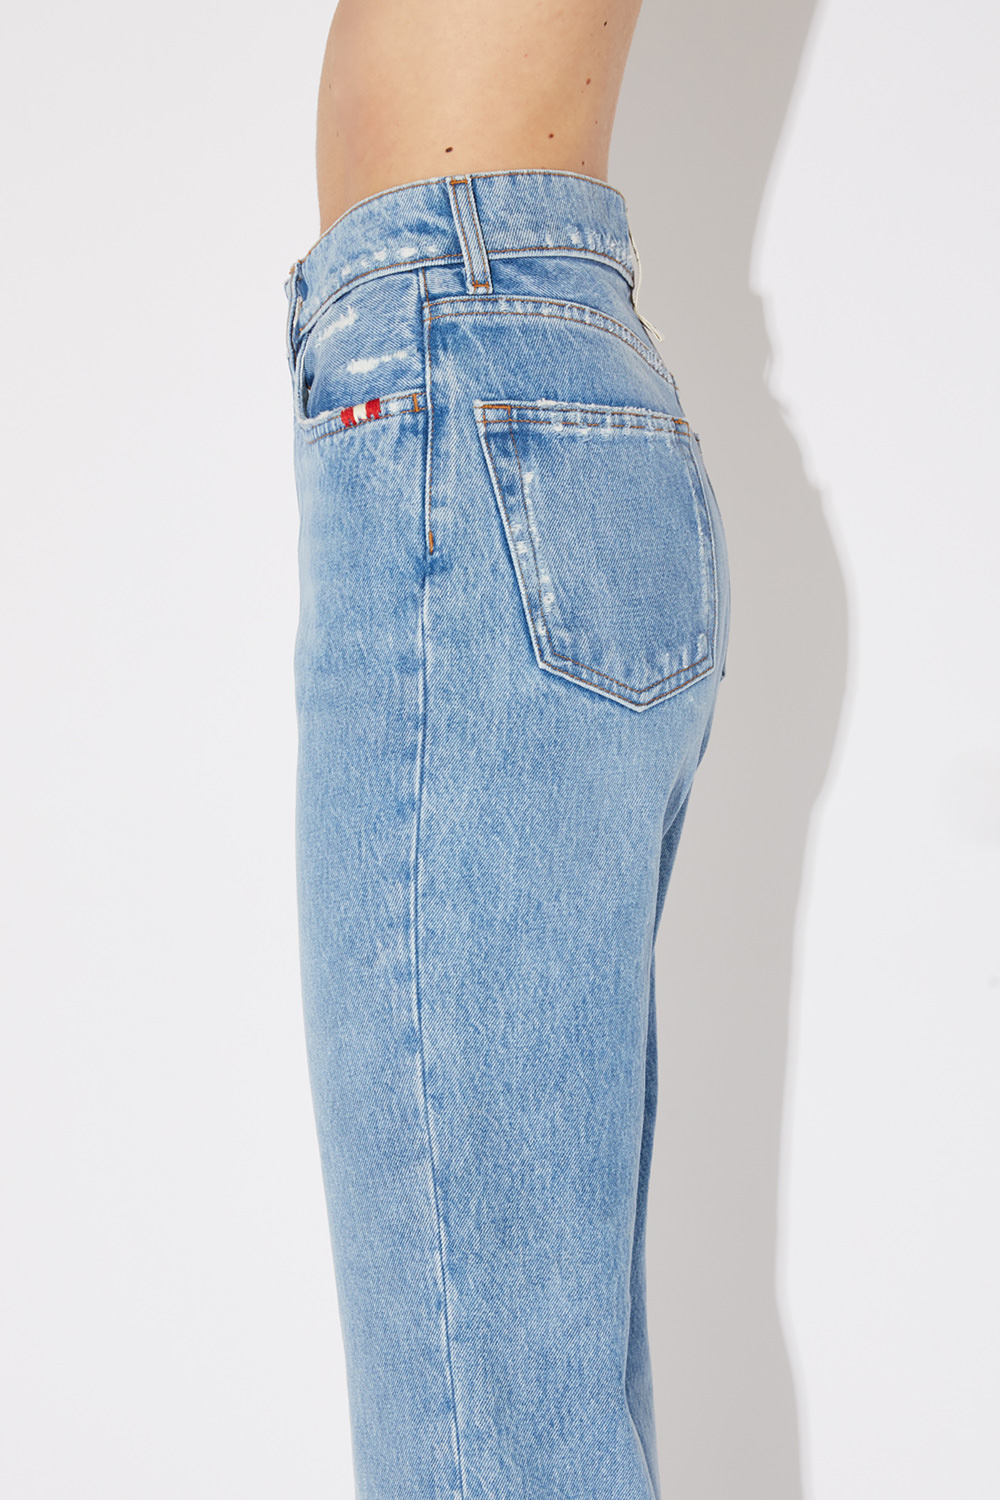 AMISH: JEANS KENDALL SUMMERTIME